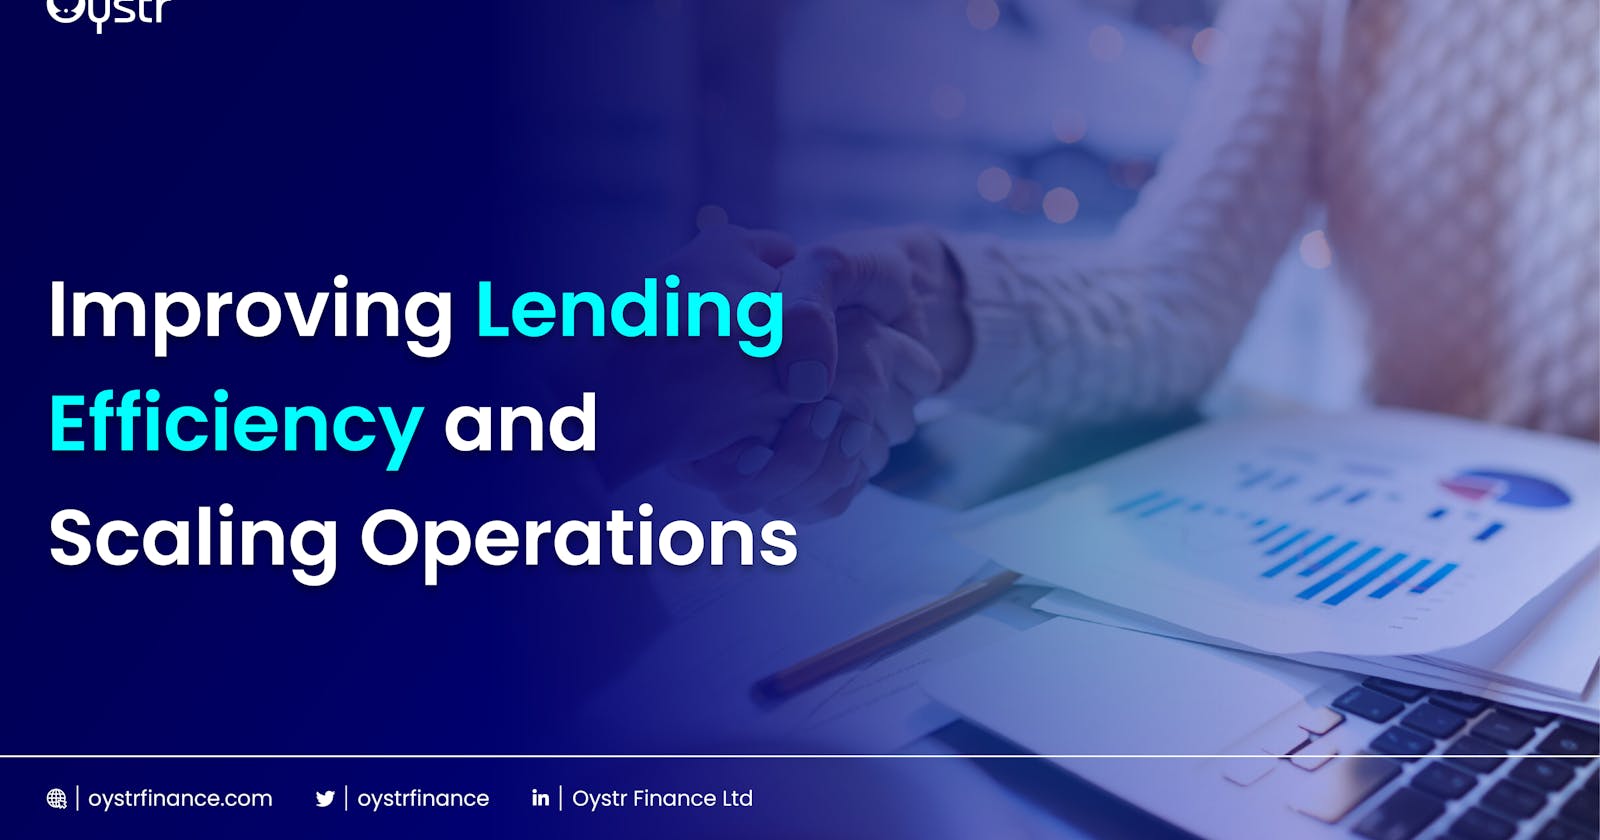 Improving Lending Efficiency and Scaling Operations